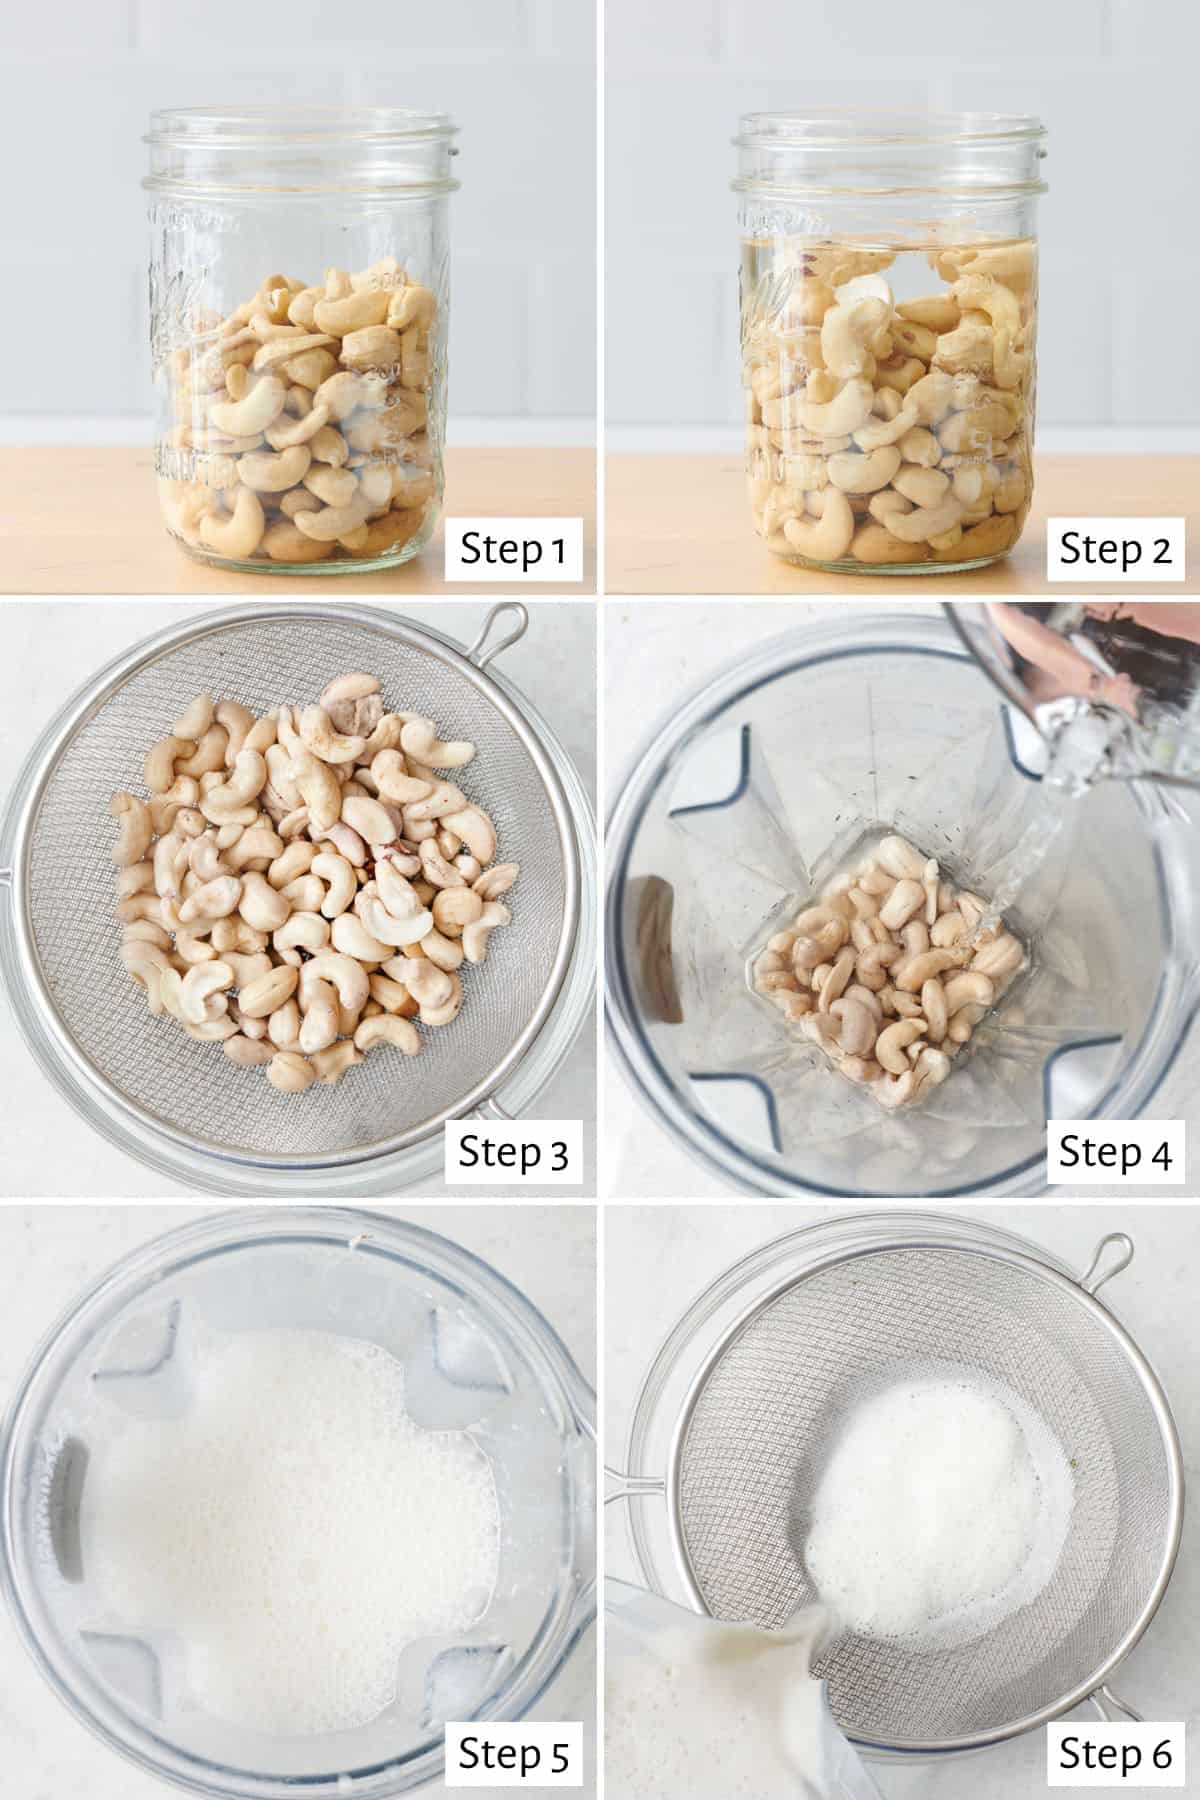 6 image collage making recipe: 1- whole cashews in a jar, 2- water added to jar, 3- draining cashews after soaking, 4- adding soaked cashews and fresh water to a blended, 5- blending until smooth and creamy, 6- (option) straining through a fine mesh sieve.